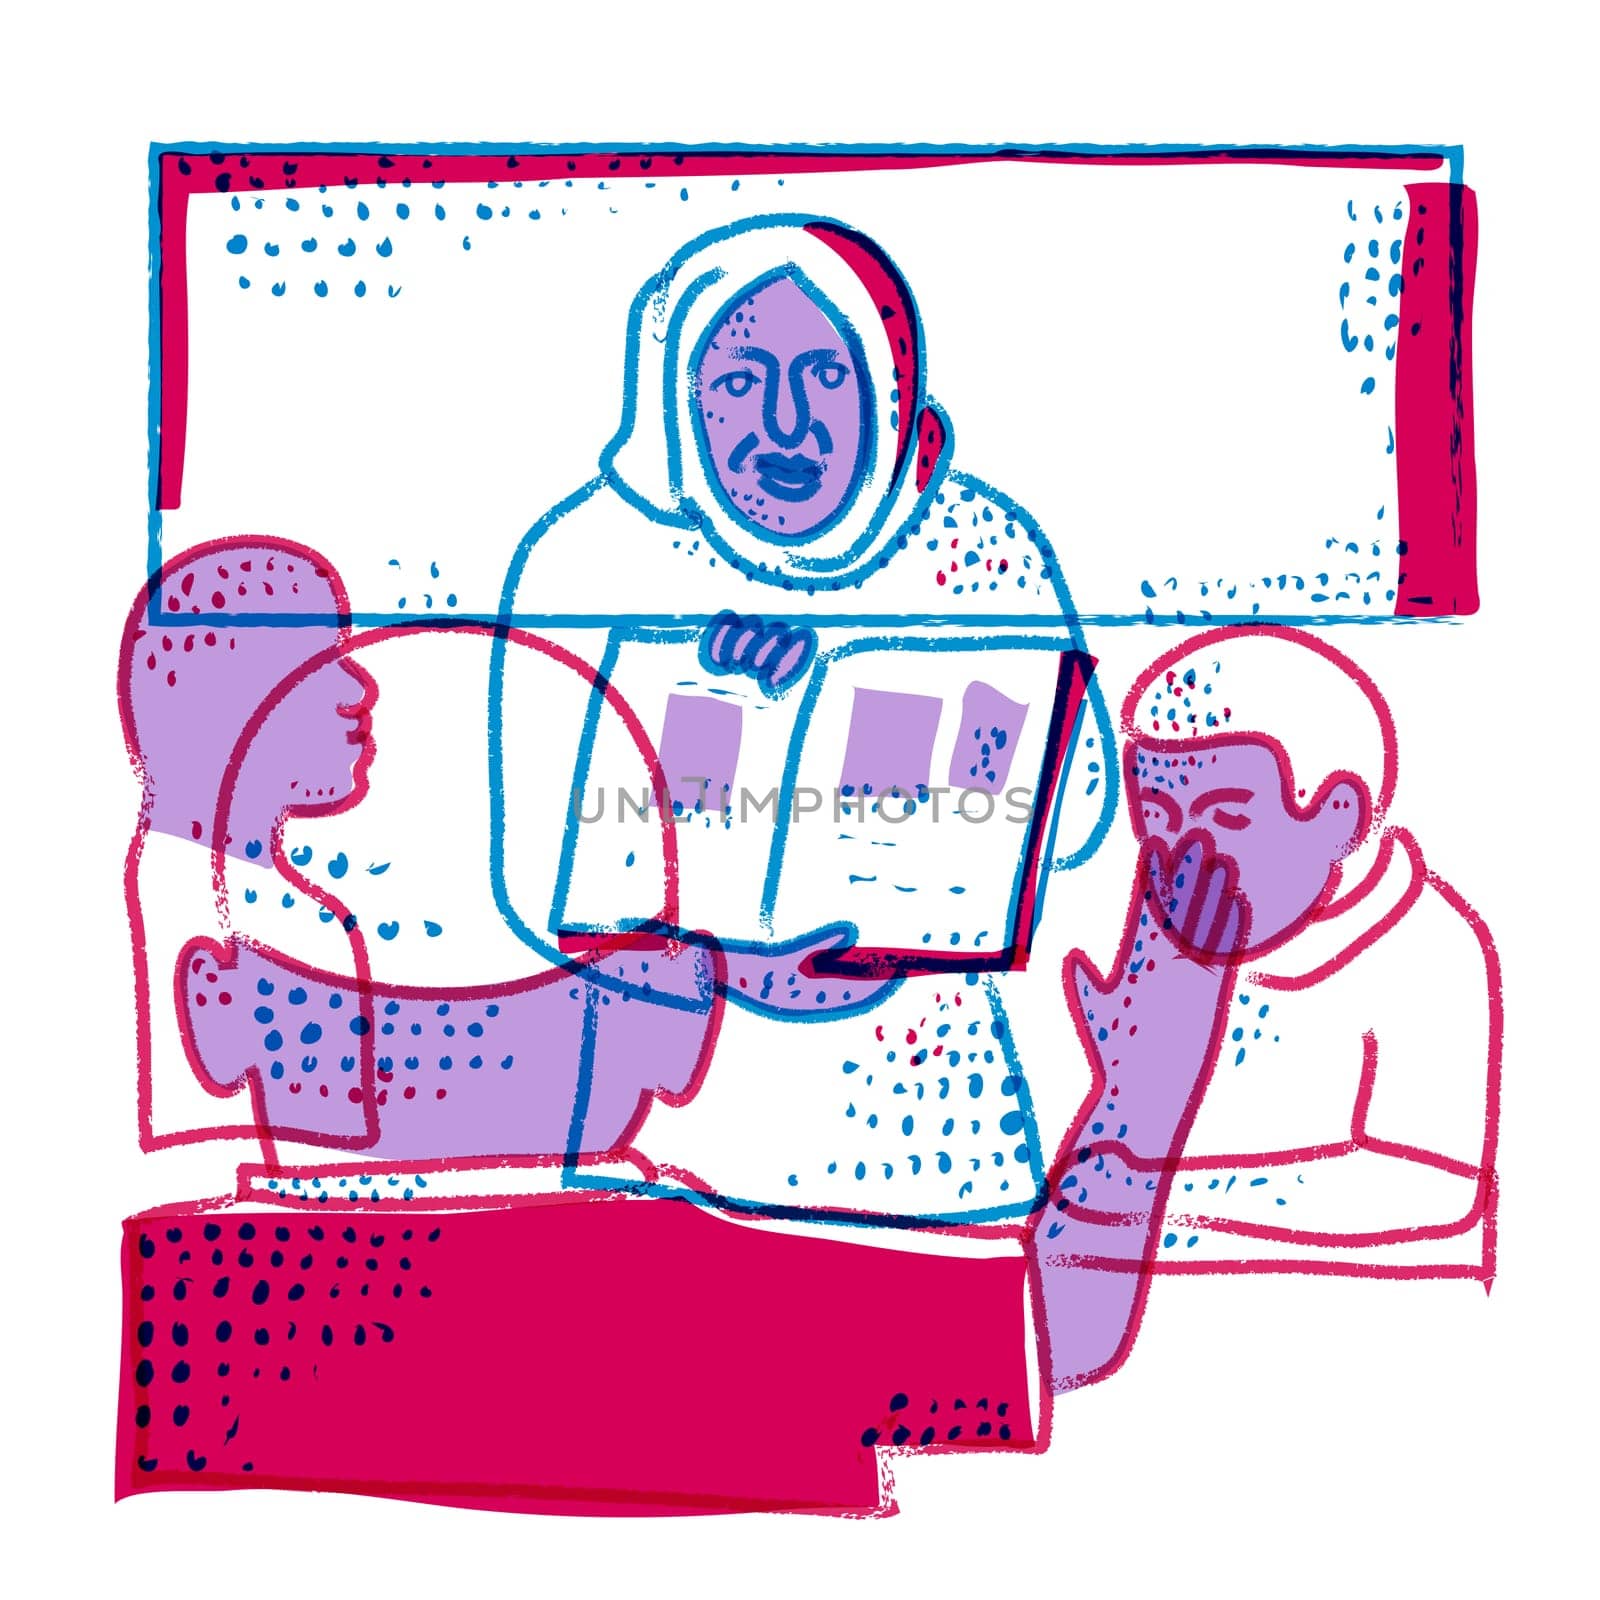 Risograph technique illustration of an Arabic teacher holding a flashcard teaching a young student or pupil in an Islamic Muslim class done in retro riso effect digital screen printing style.
